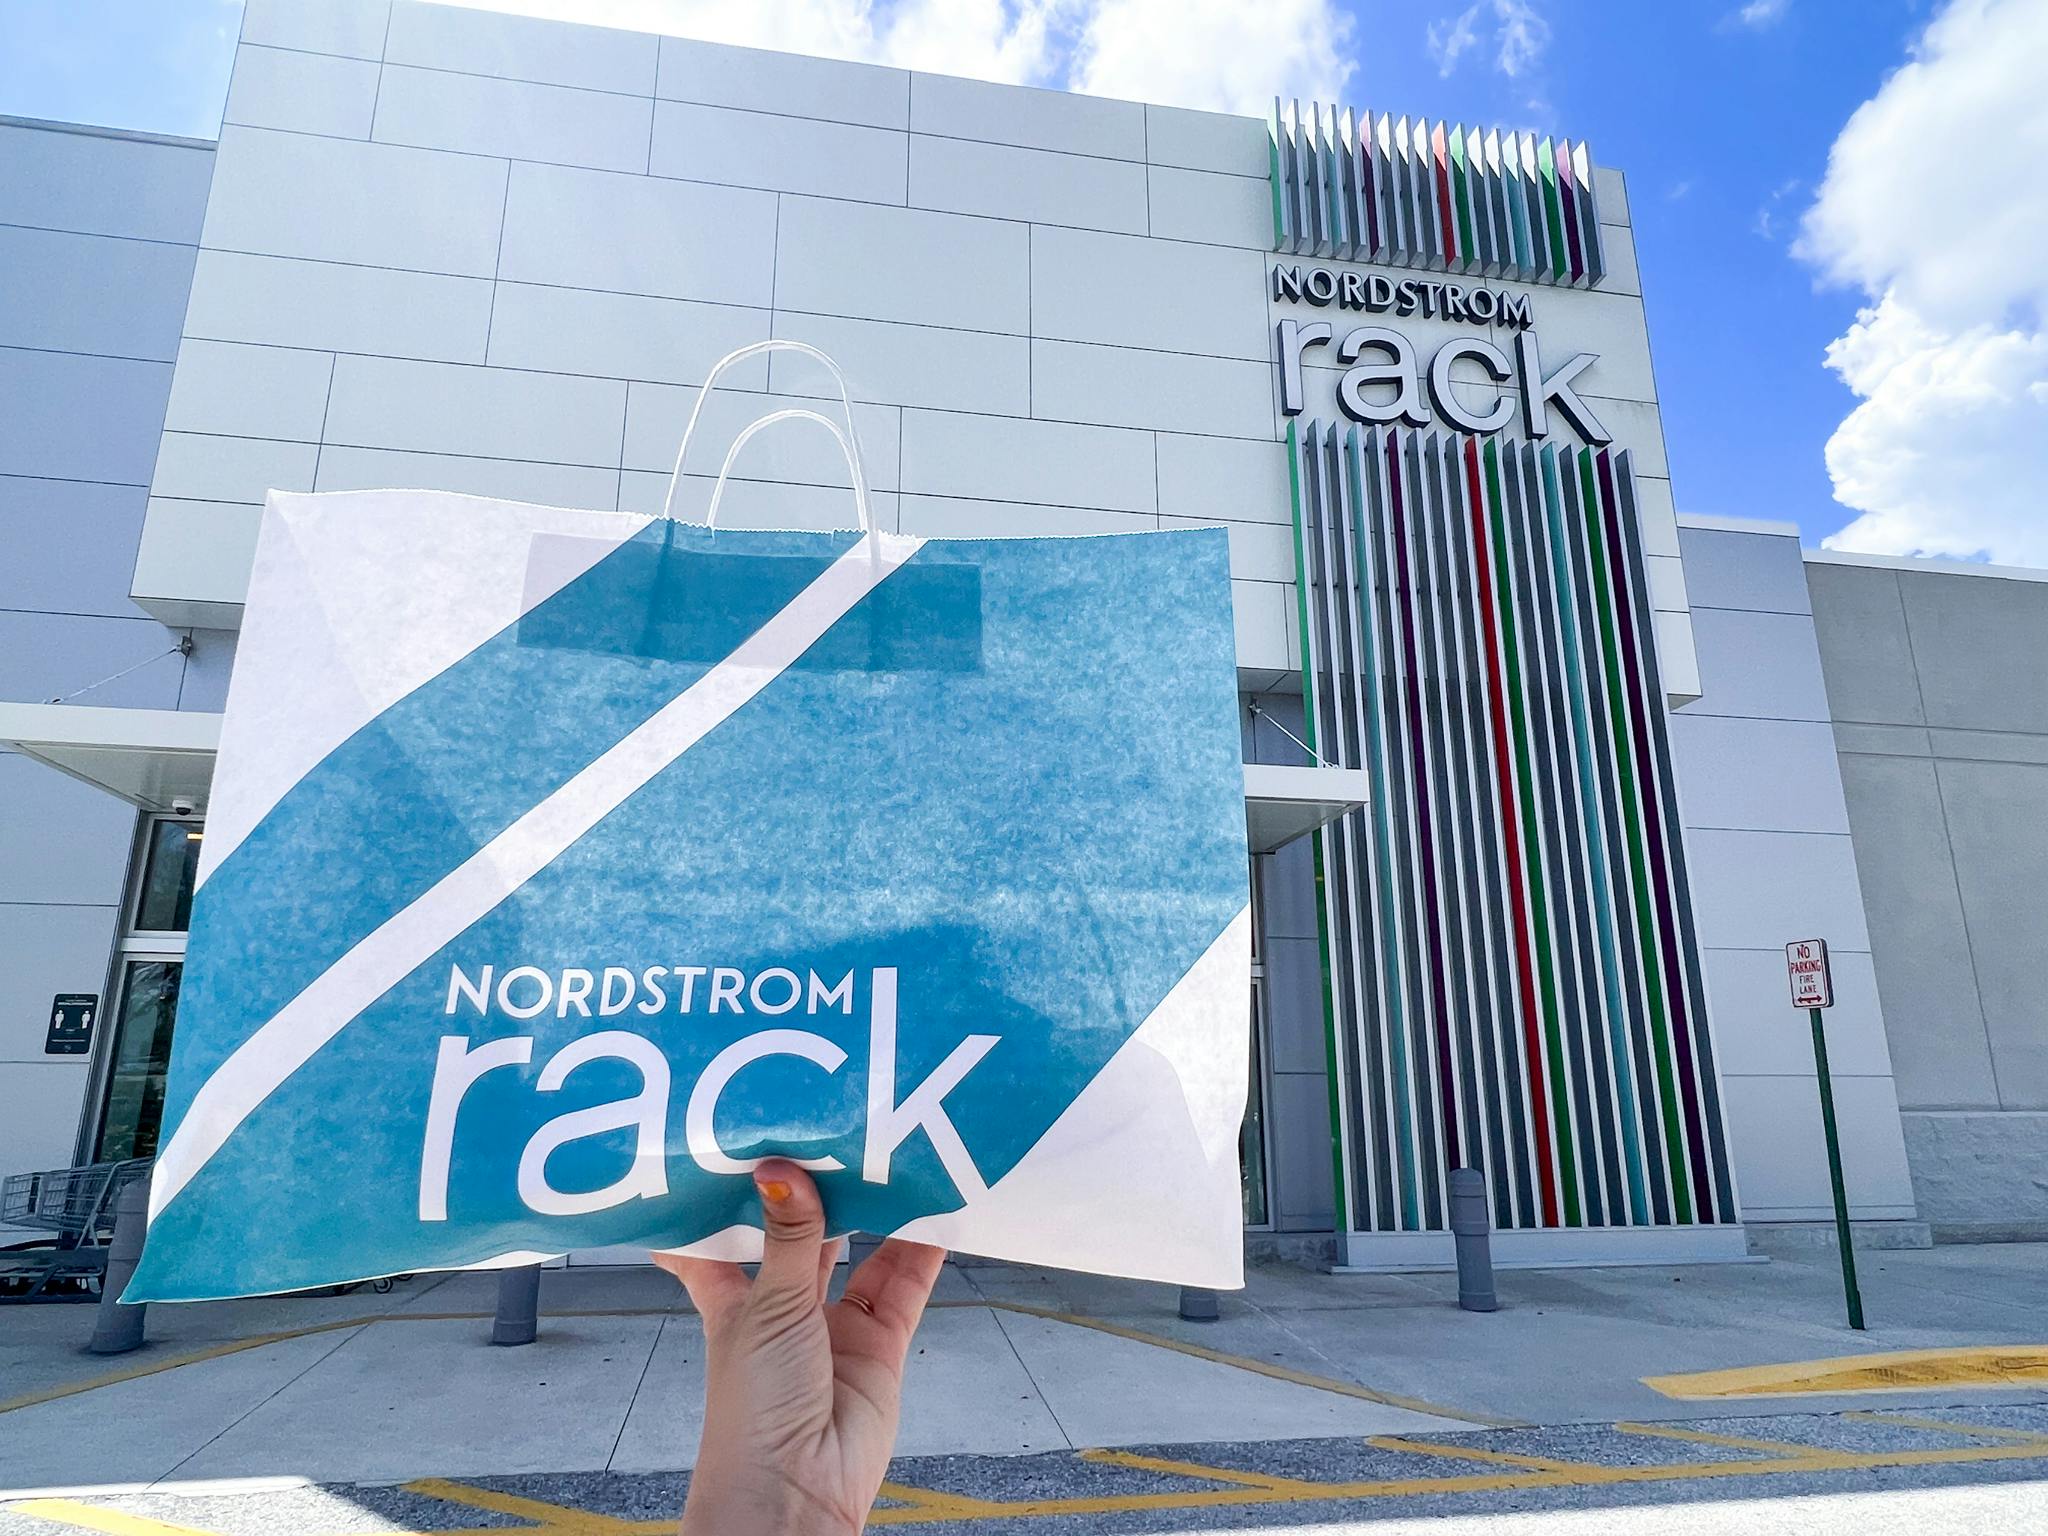 A person's hand holding up a Nordstrom Rack bag in front of a Nordstrom Rack store front.